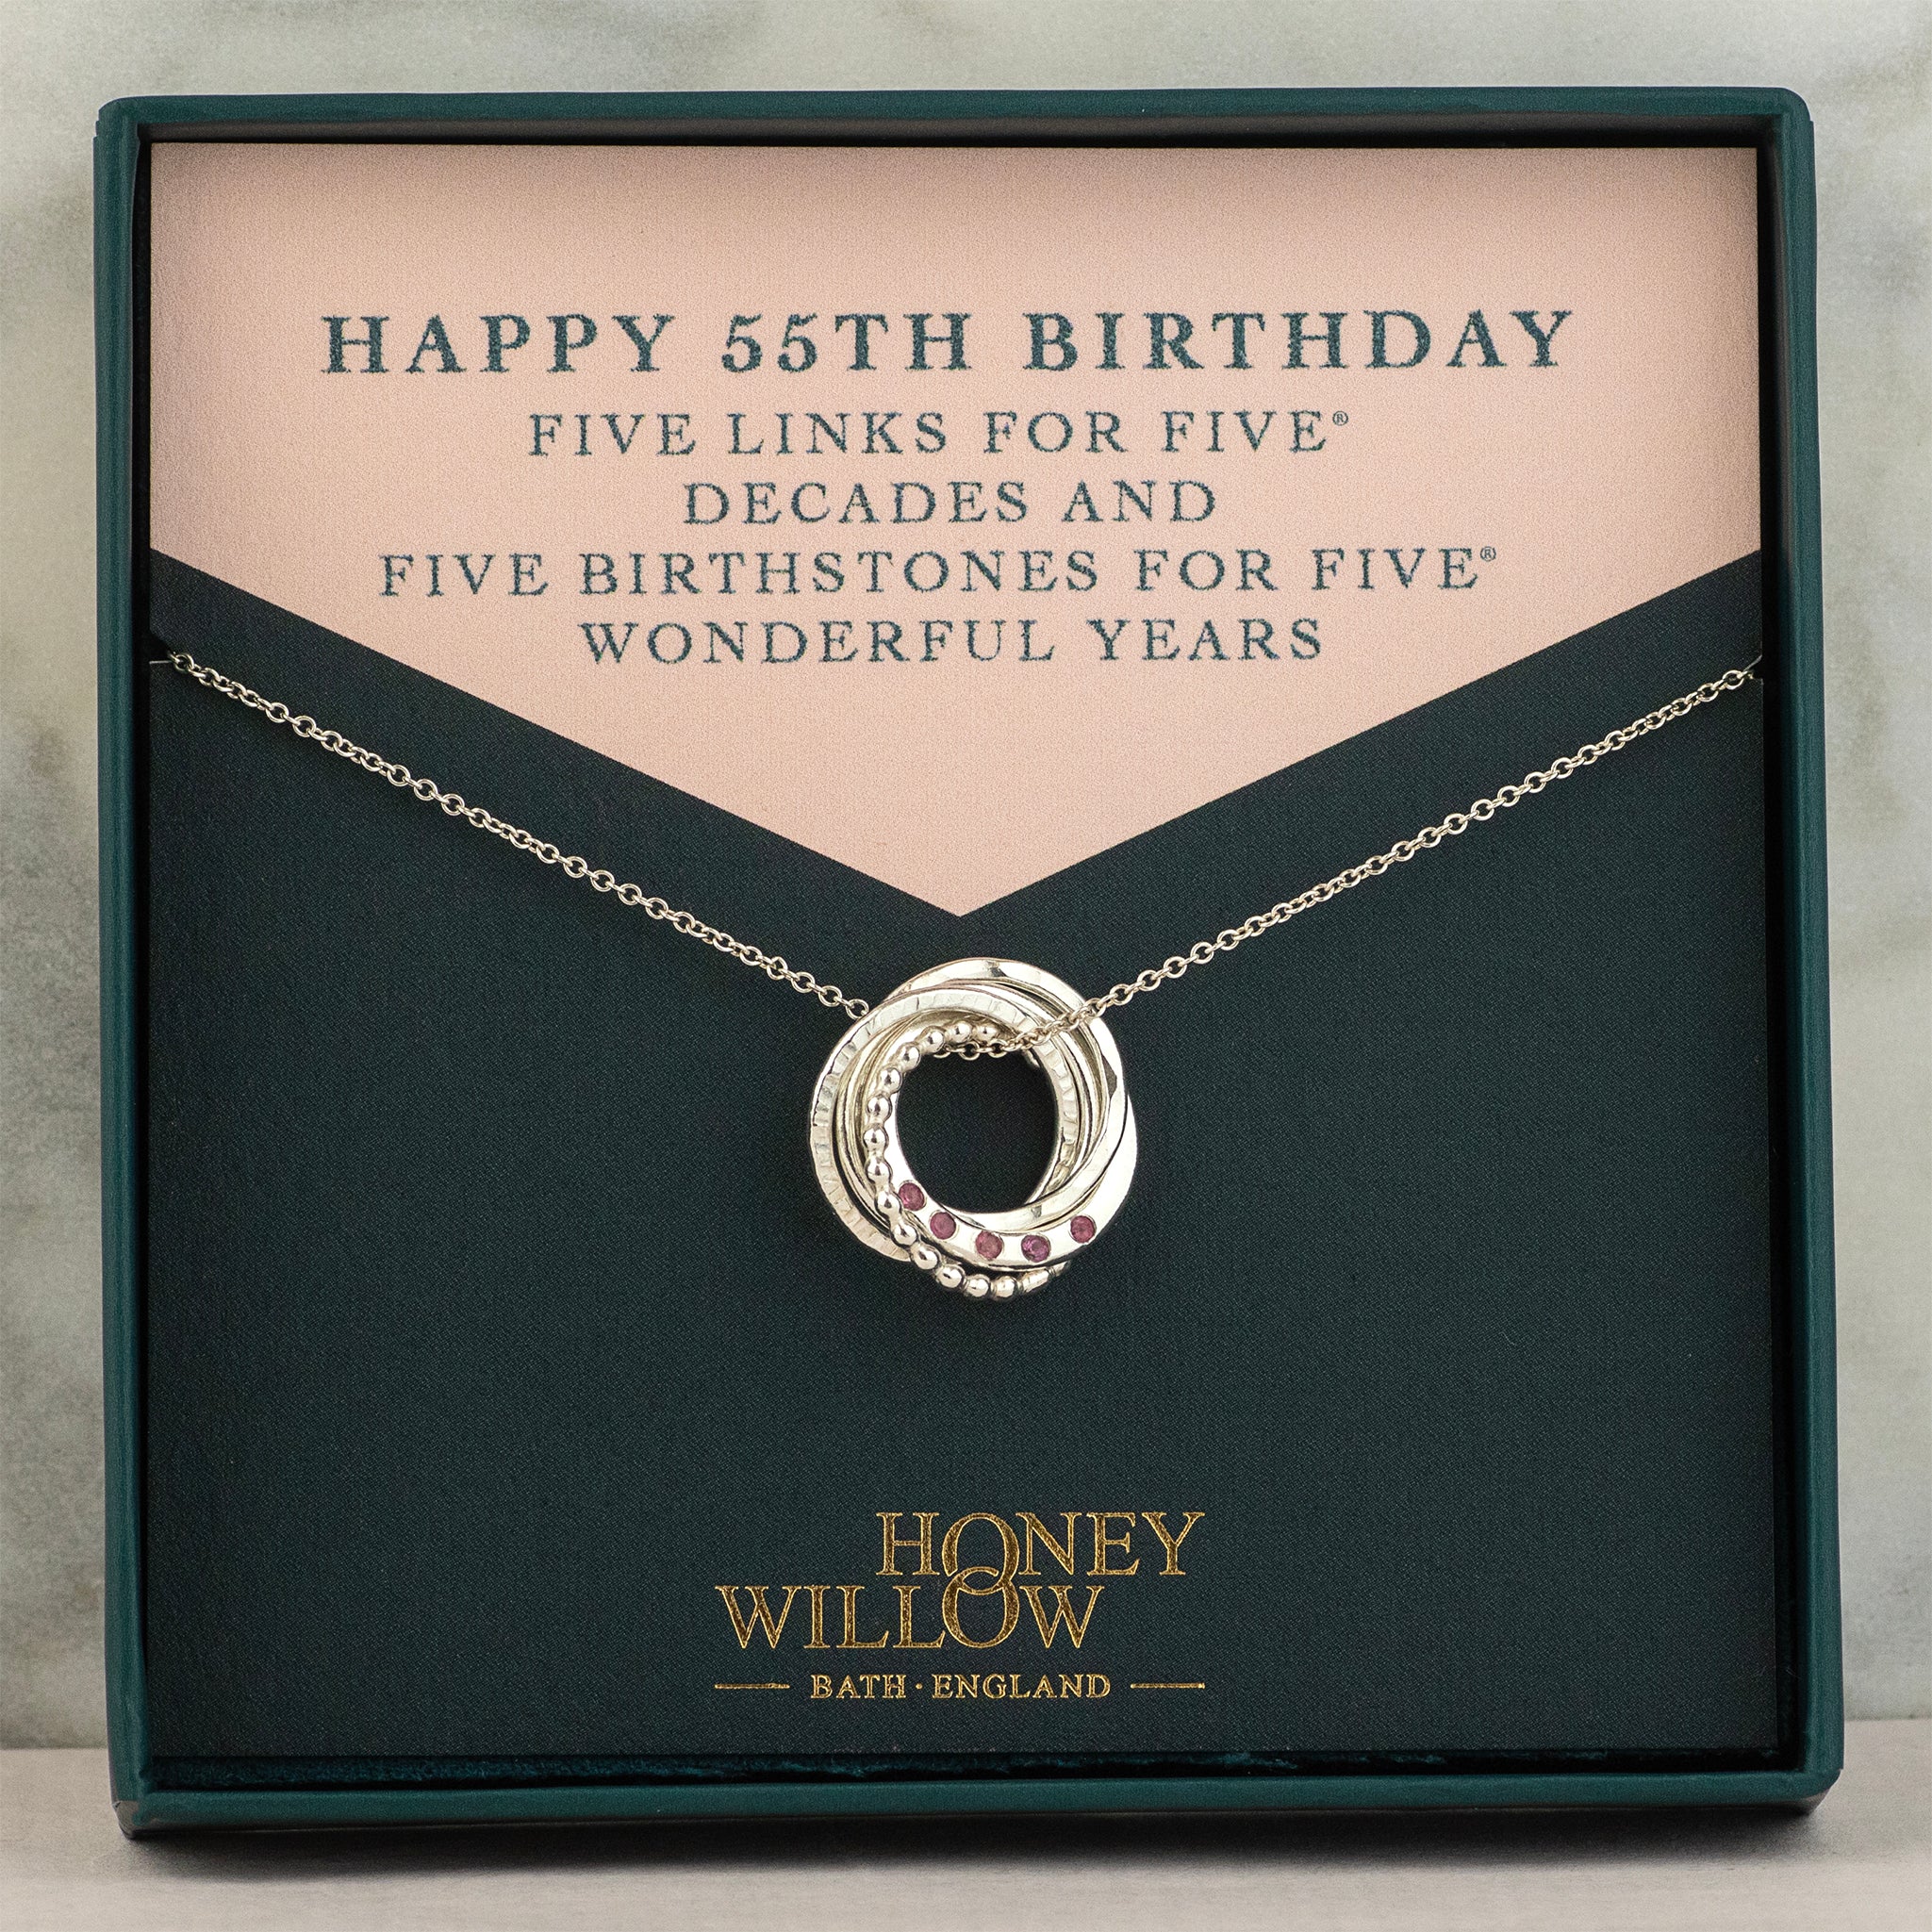 Personalised Mixed Gold Russian Ring Necklace By Posh Totty Designs |  notonthehighstreet.com